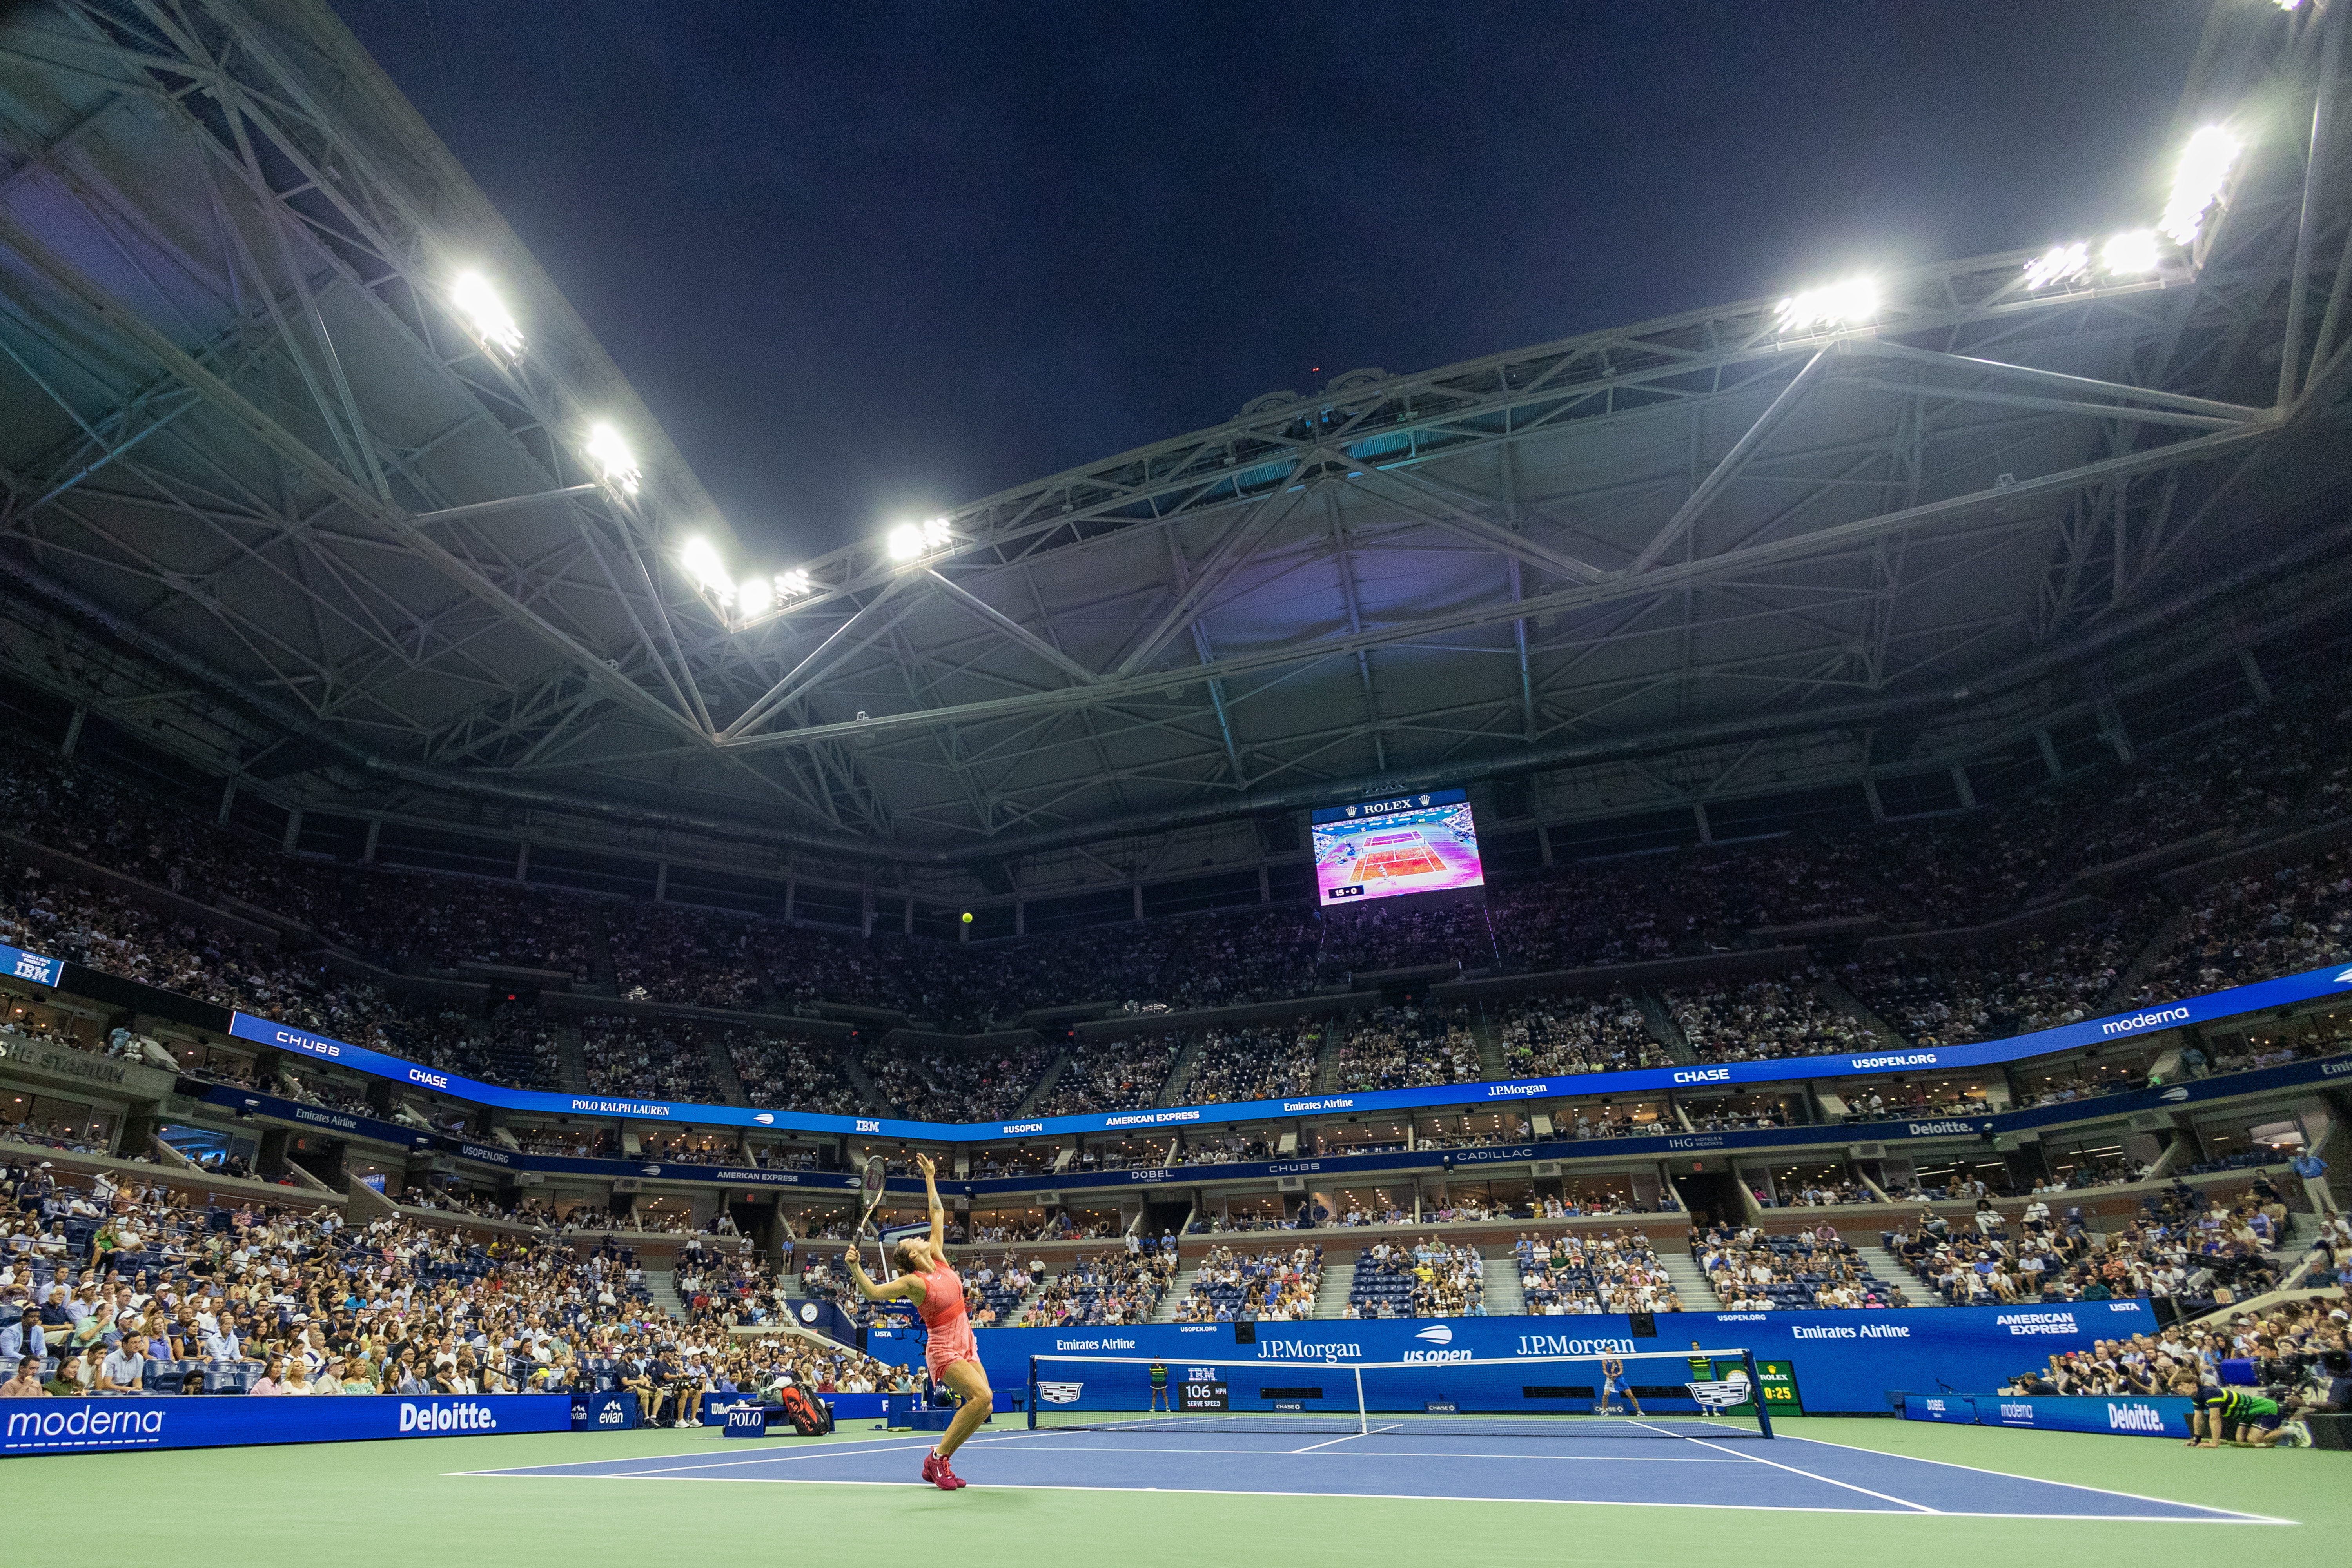 A general view of Aryna Sabalenka of Belarus serving against Daria Kasatkina of Russia in the Women’s Singles round four match on Arthur Ashe Stadium during the US Open Tennis Championship 2023 at the USTA National Tennis Centre on September 4th, 2023 in Flushing, Queens, New York City.